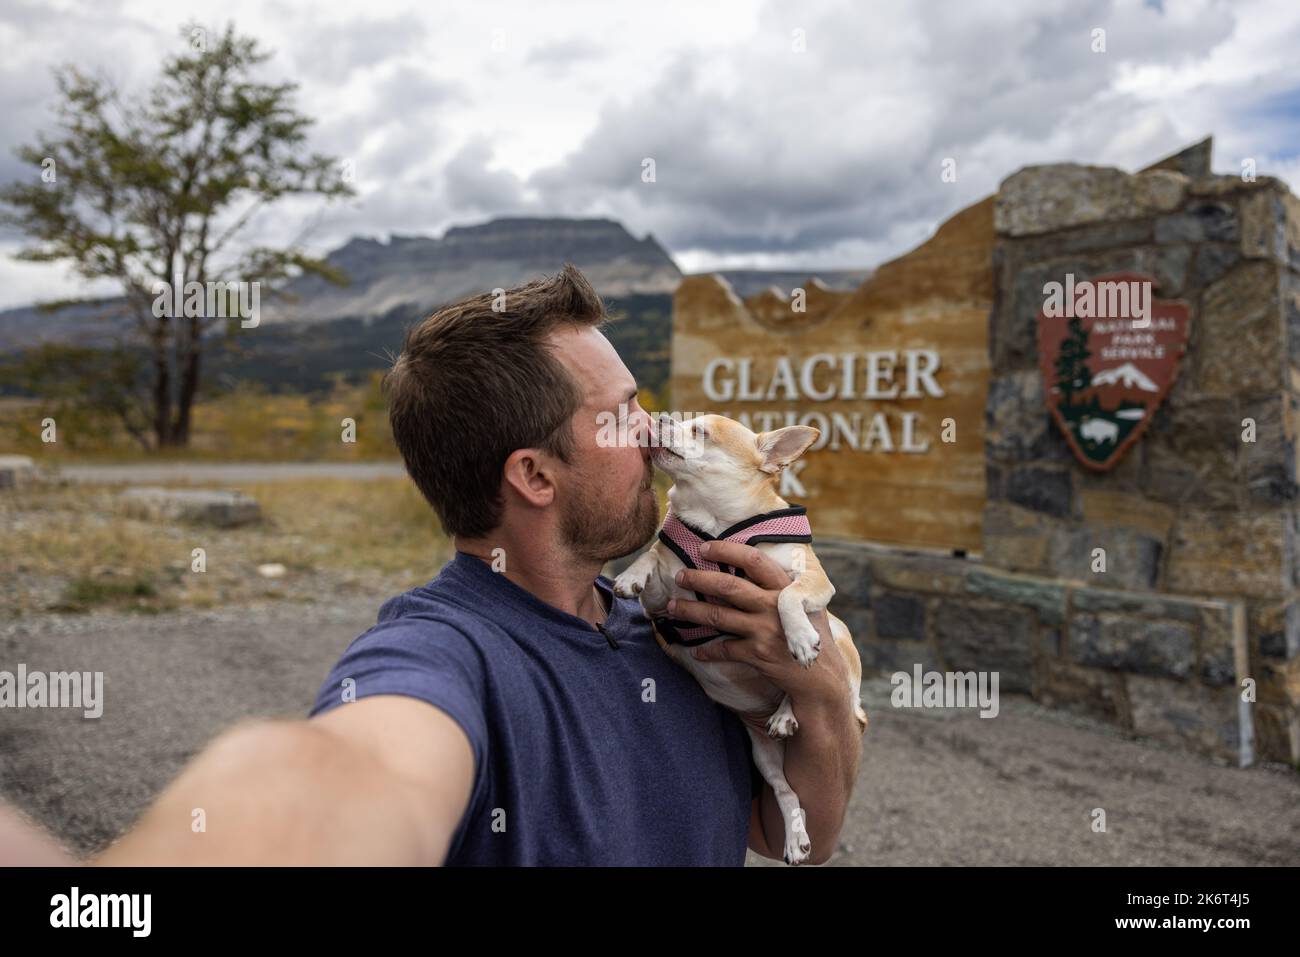 Man and his best friend a chihuahua taking a selfie in front of the welcome sign for Glacier National Park in Montana Stock Photo